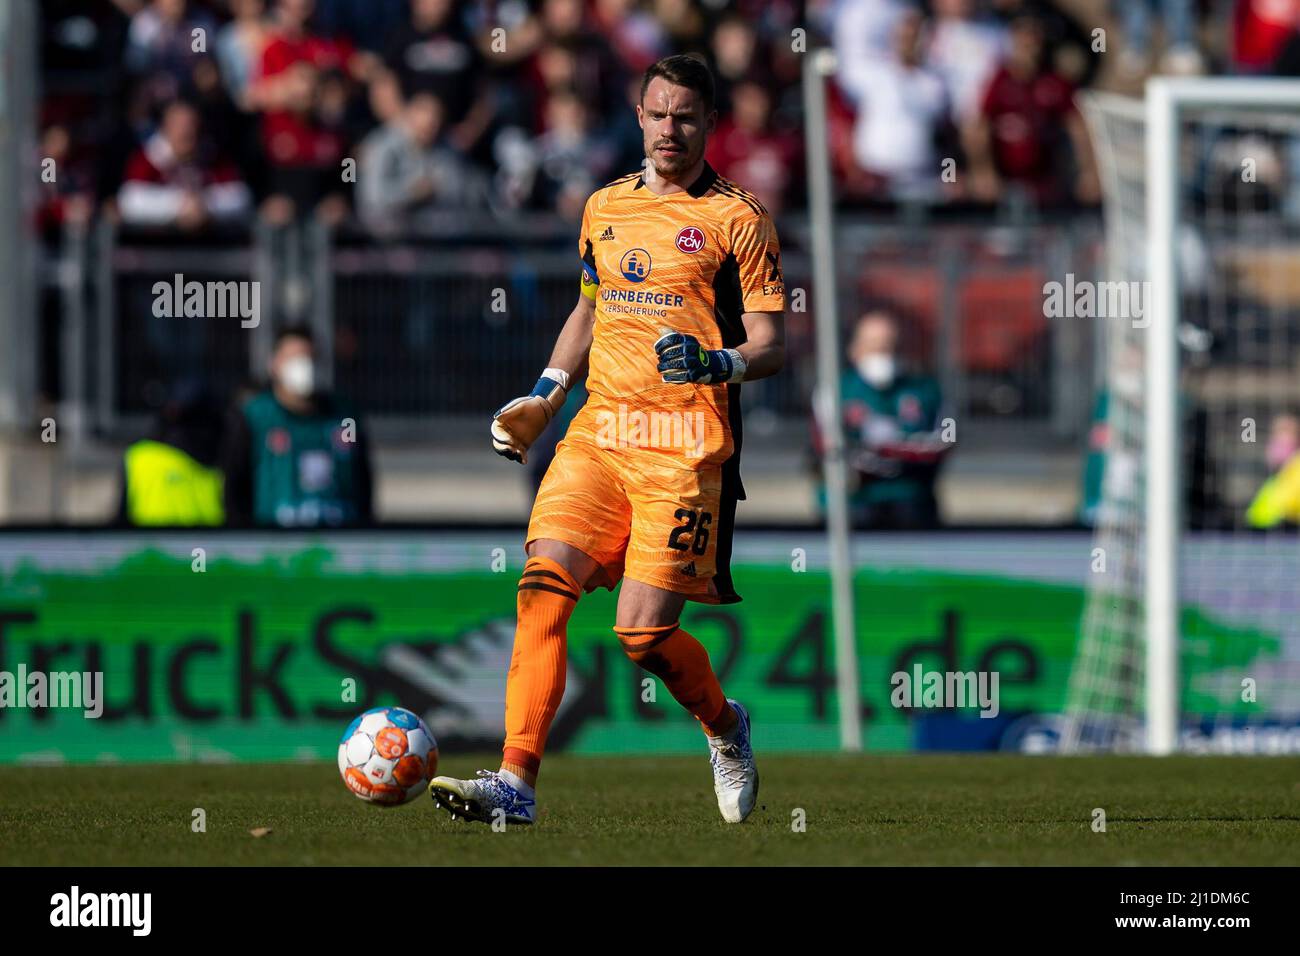 Nuremberg, Germany. 20th Mar, 2022. Soccer: 2nd Bundesliga, 1. FC Nürnberg - Dynamo Dresden, Matchday 27, Max Morlock Stadium. Nuremberg goalkeeper Christian Mathenia in action. Credit: Tom Weller/dpa - IMPORTANT NOTE: In accordance with the requirements of the DFL Deutsche Fußball Liga and the DFB Deutscher Fußball-Bund, it is prohibited to use or have used photographs taken in the stadium and/or of the match in the form of sequence pictures and/or video-like photo series./dpa/Alamy Live News Stock Photo